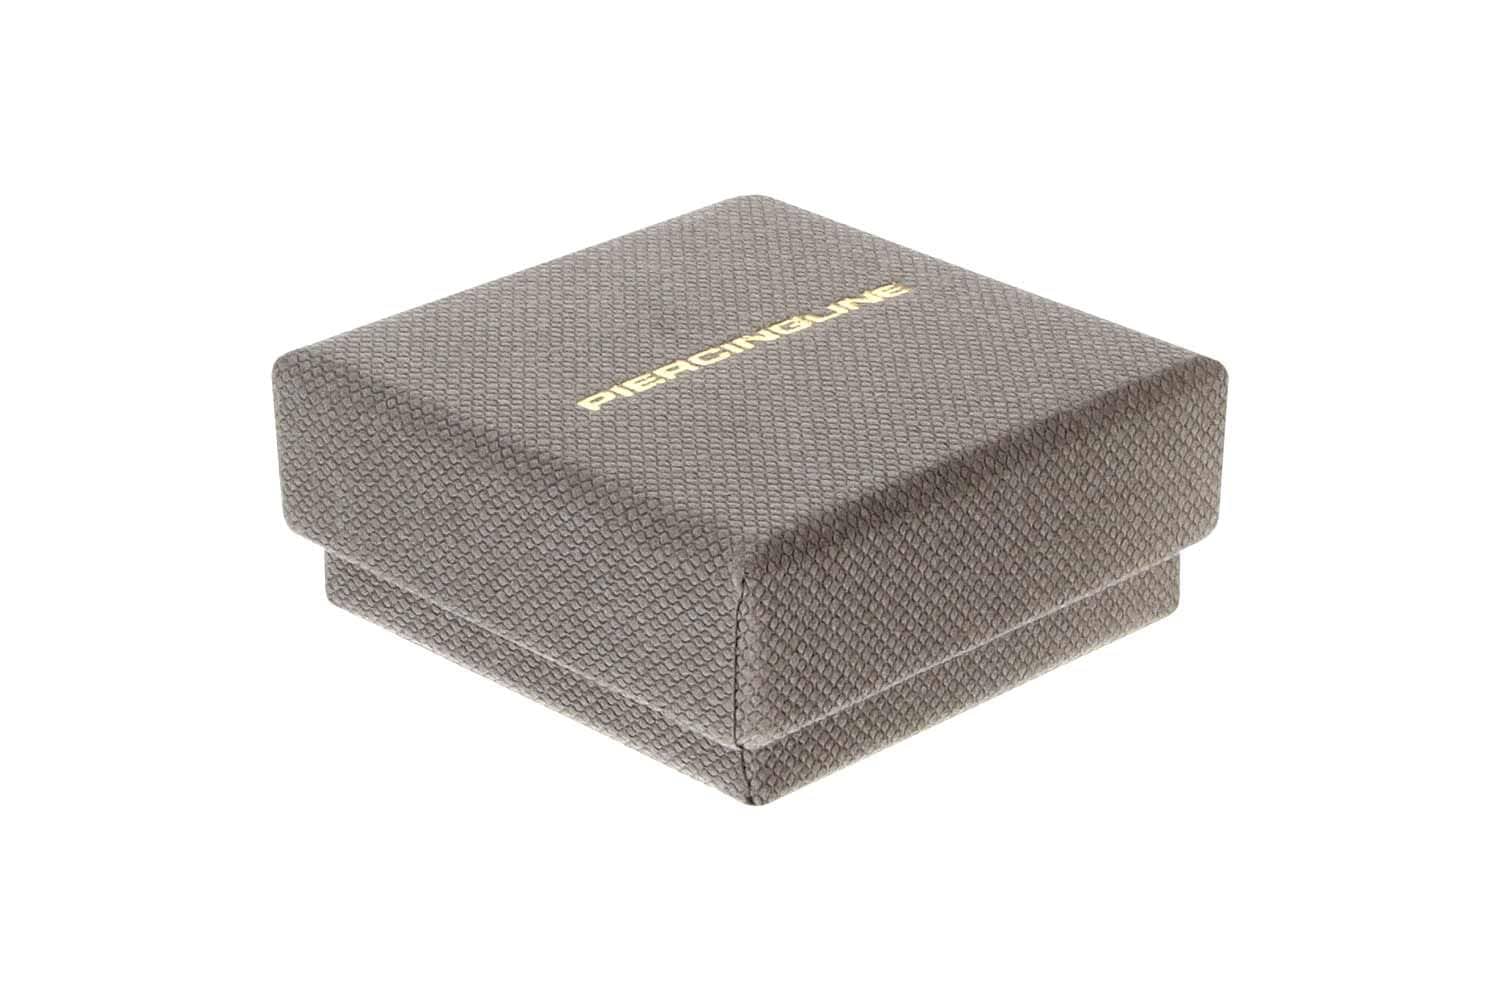 Gift box with foam material + PIERCINGLINE imprint - taupe